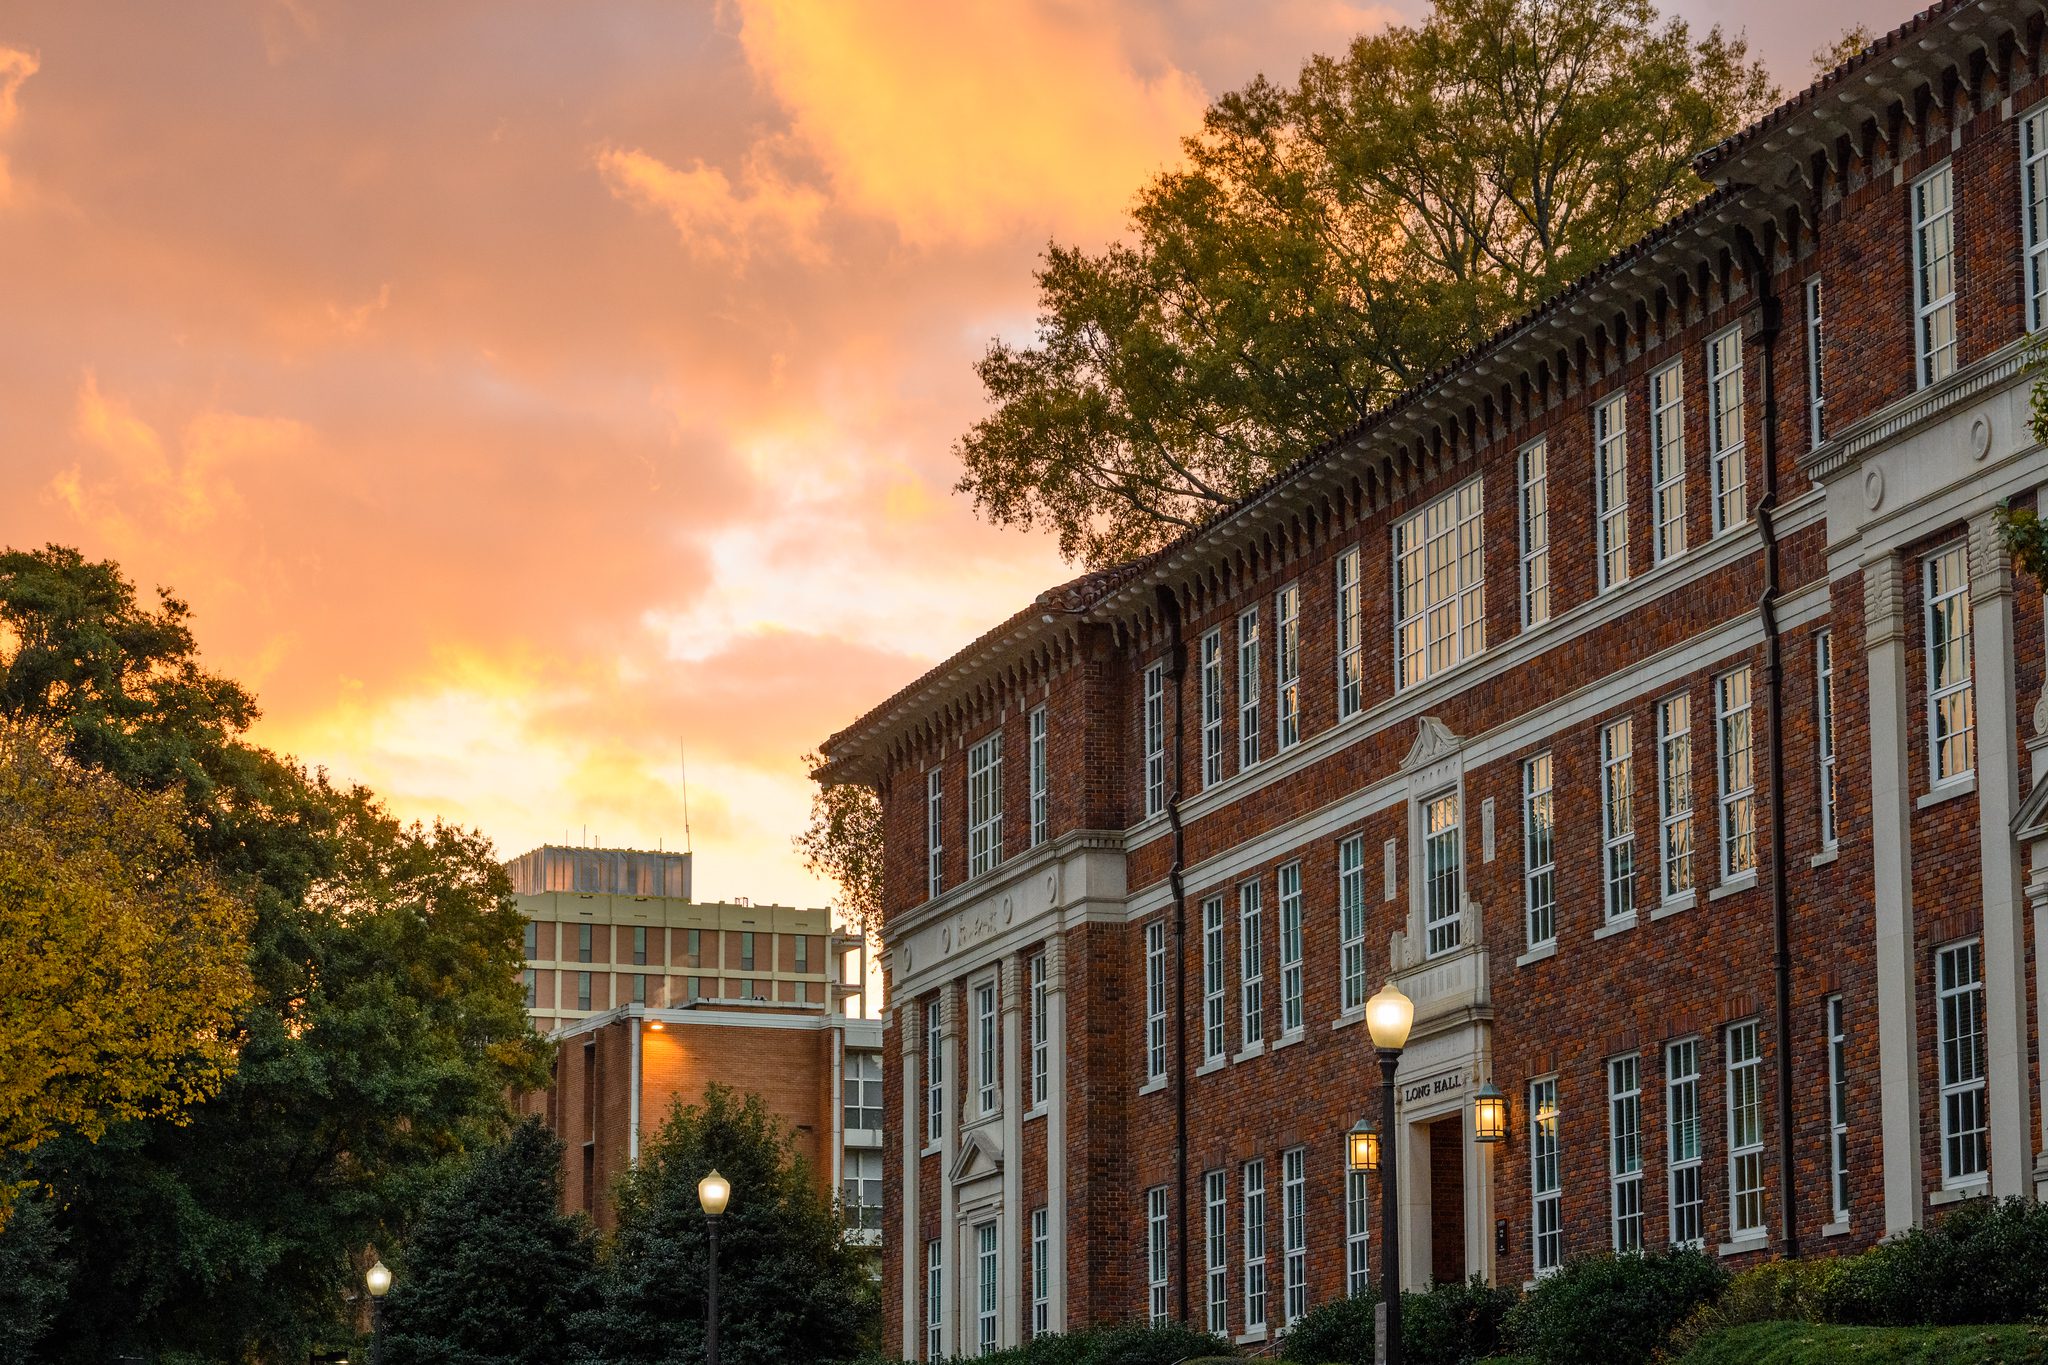 Spectacular sunset over main campus buildings at Clemson University